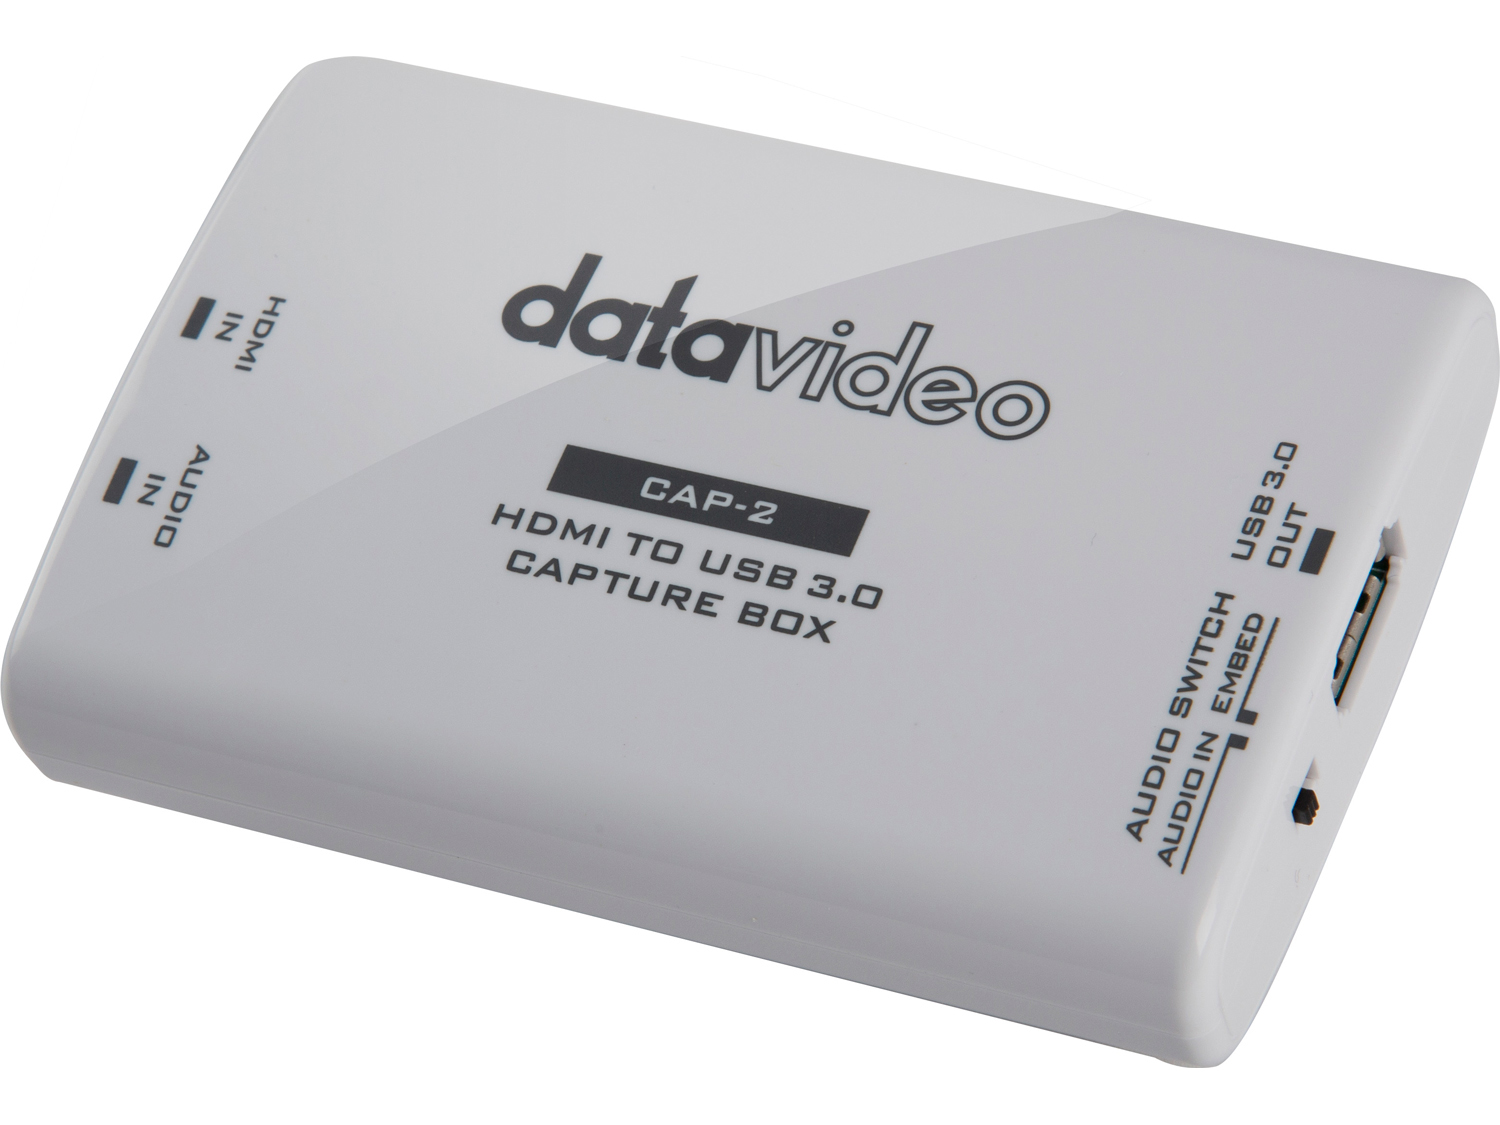 Datavideo CAP-2 HDMI to USB 3.0 Capture Box/Supports up to 1080p50/60